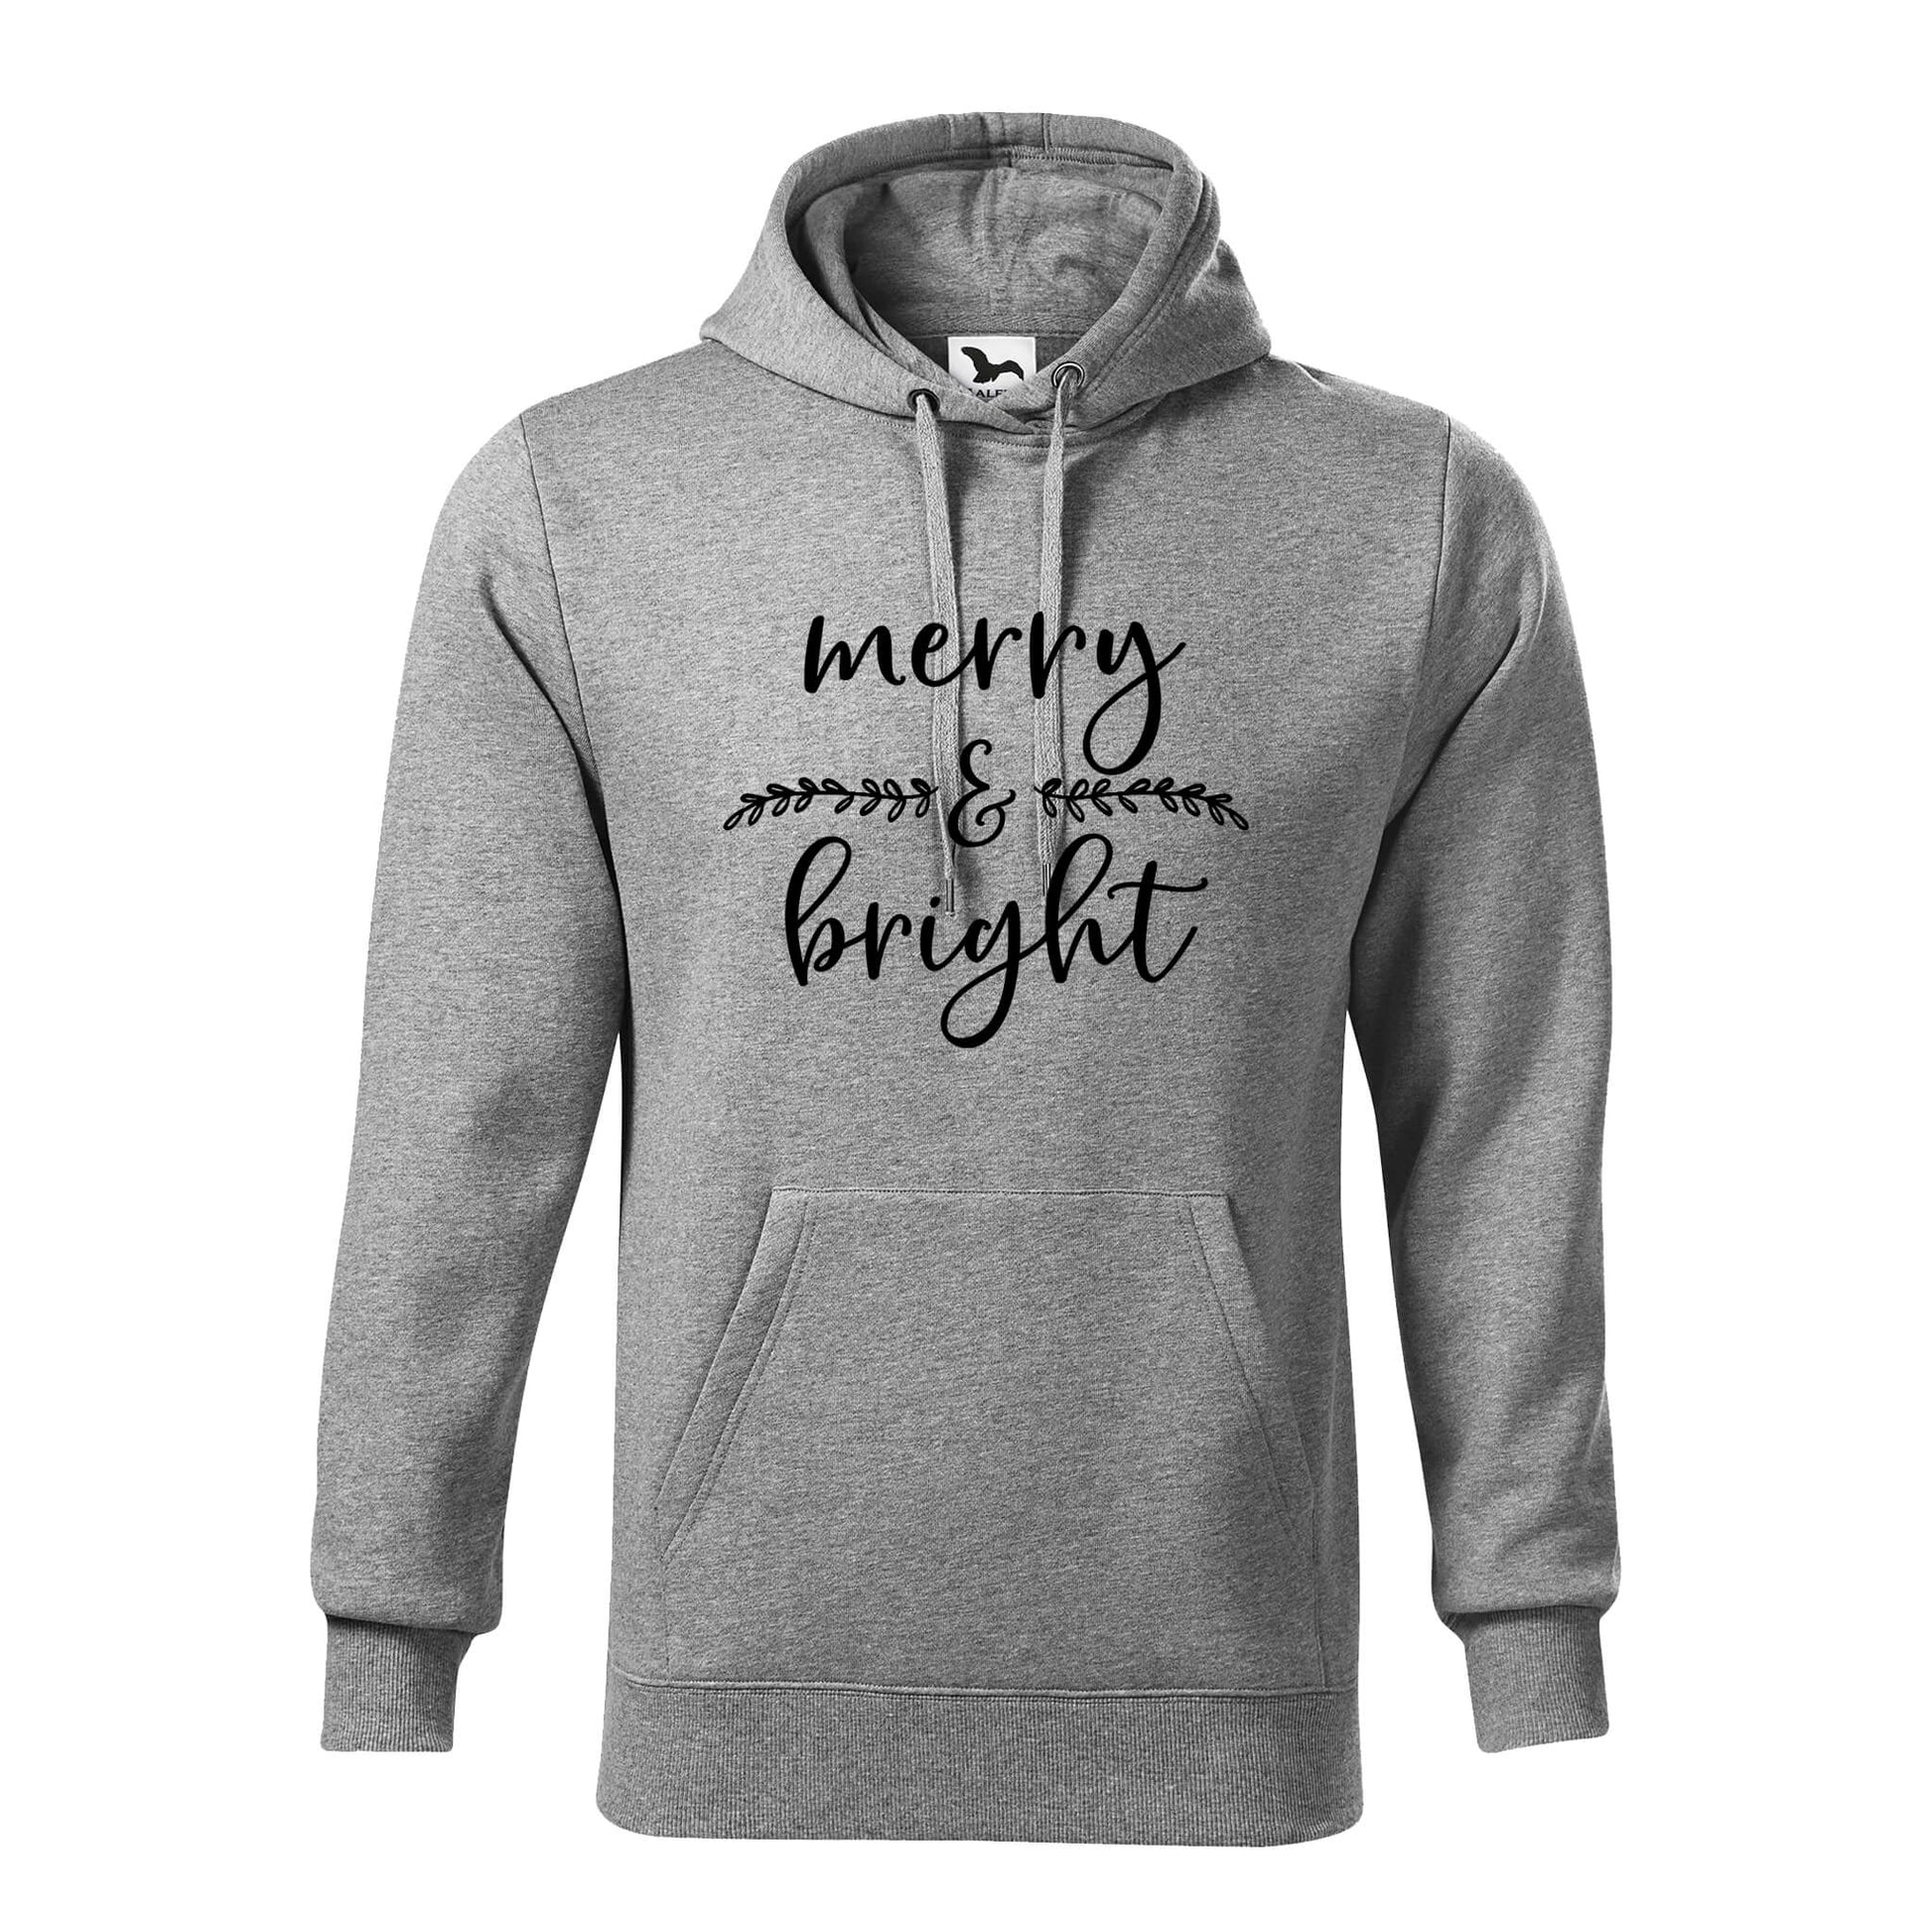 Merry and bright new hoodie - rvdesignprint